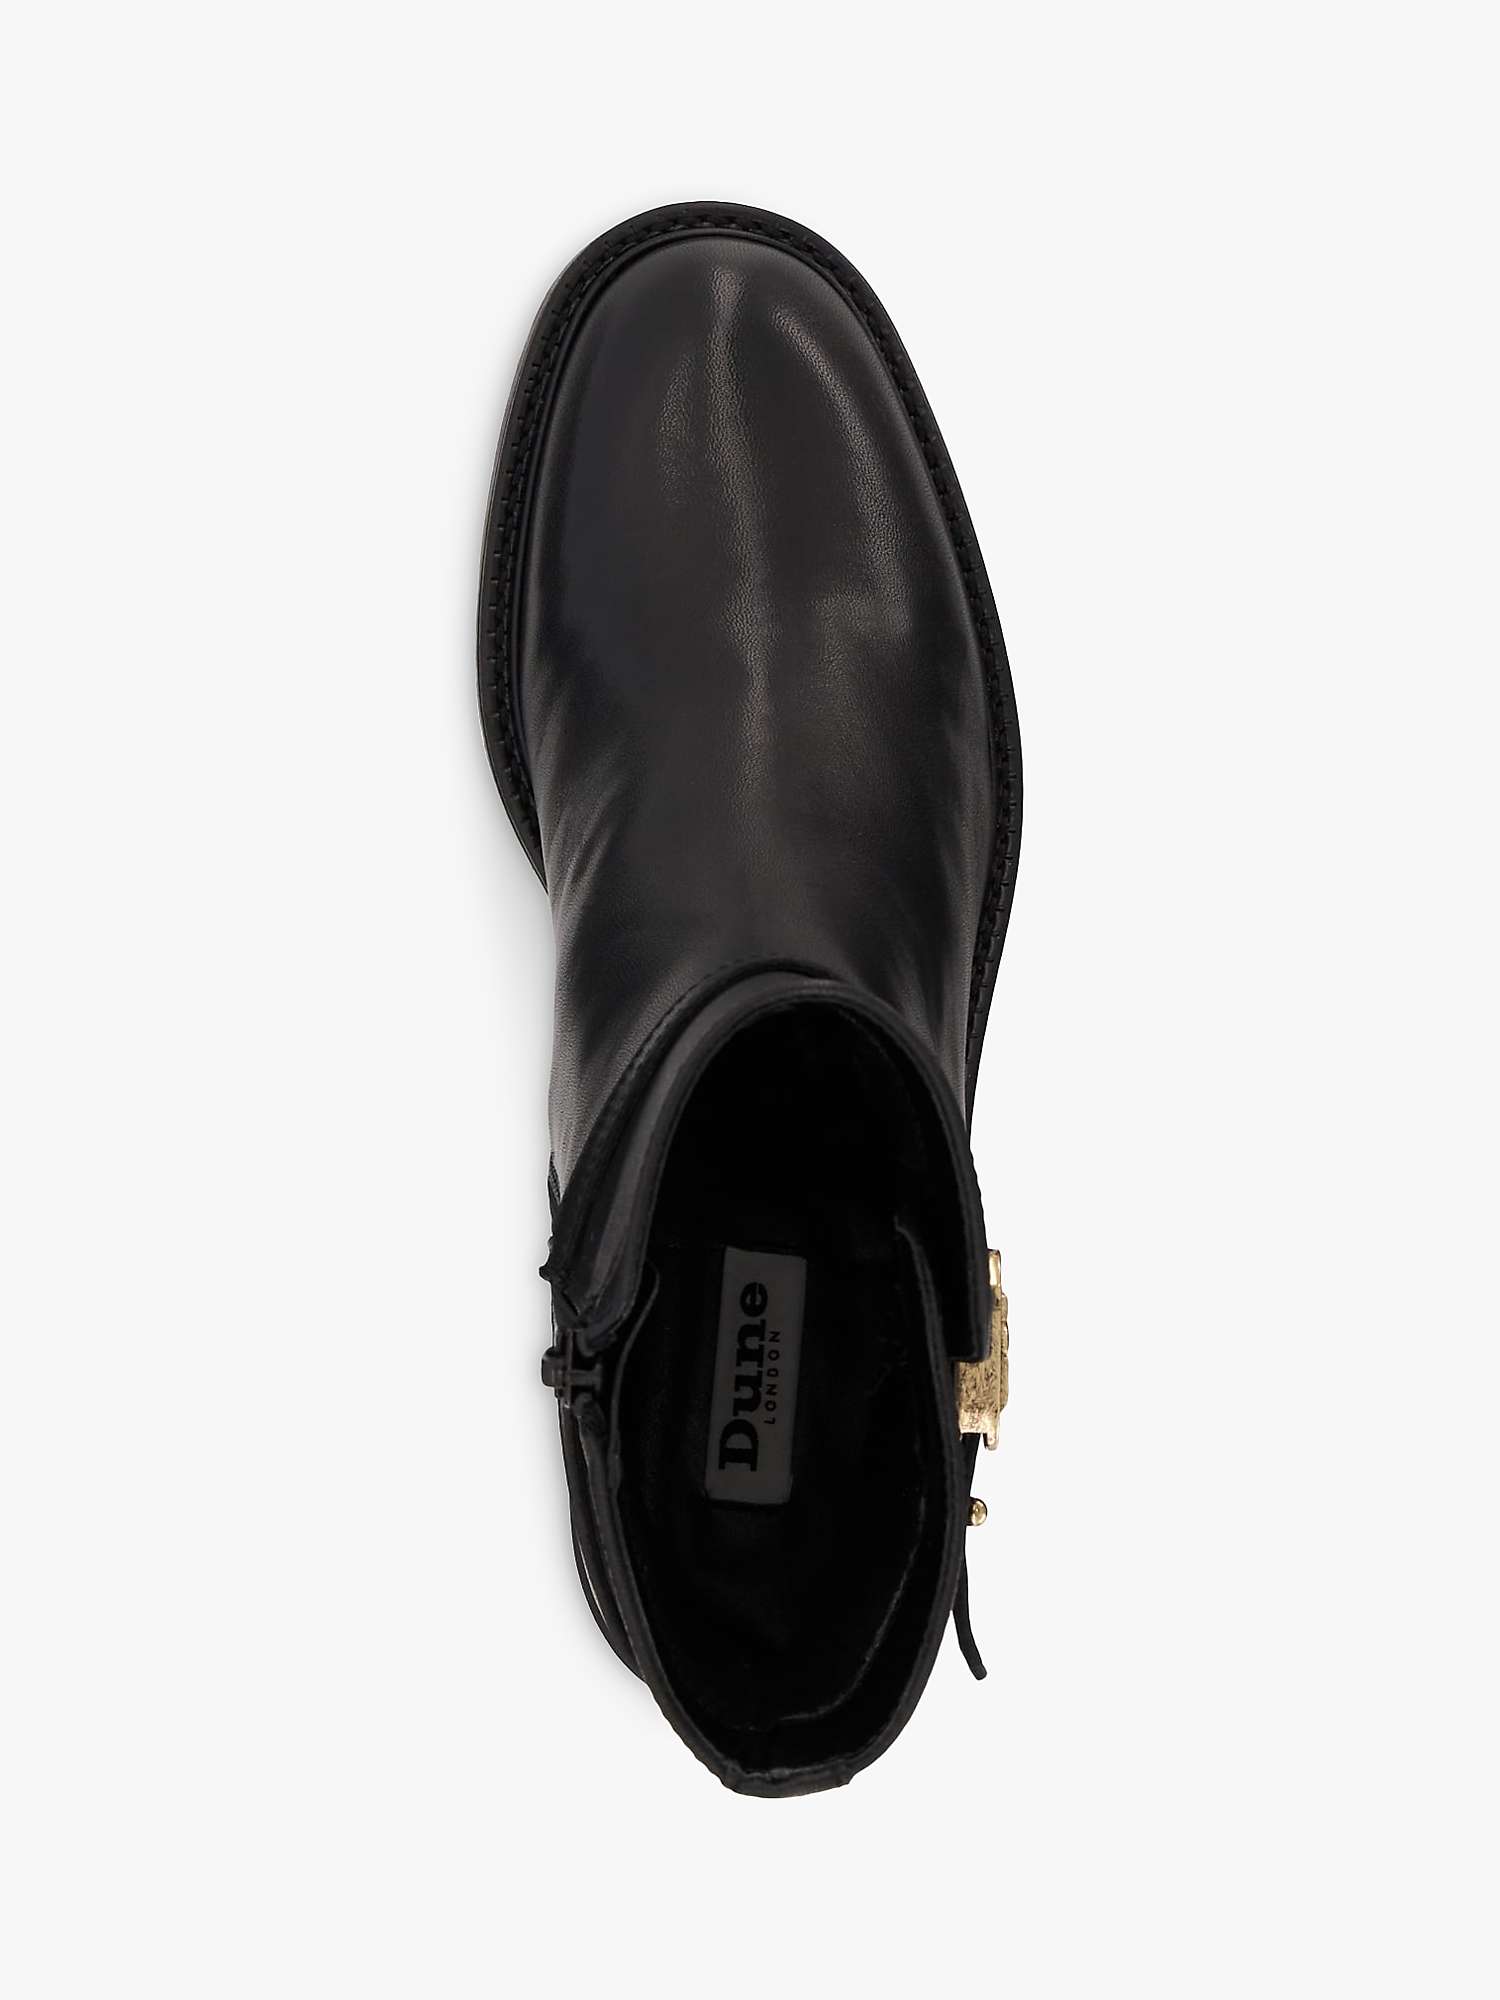 Buy Dune Praising Leather Ankle Boots, Black Online at johnlewis.com